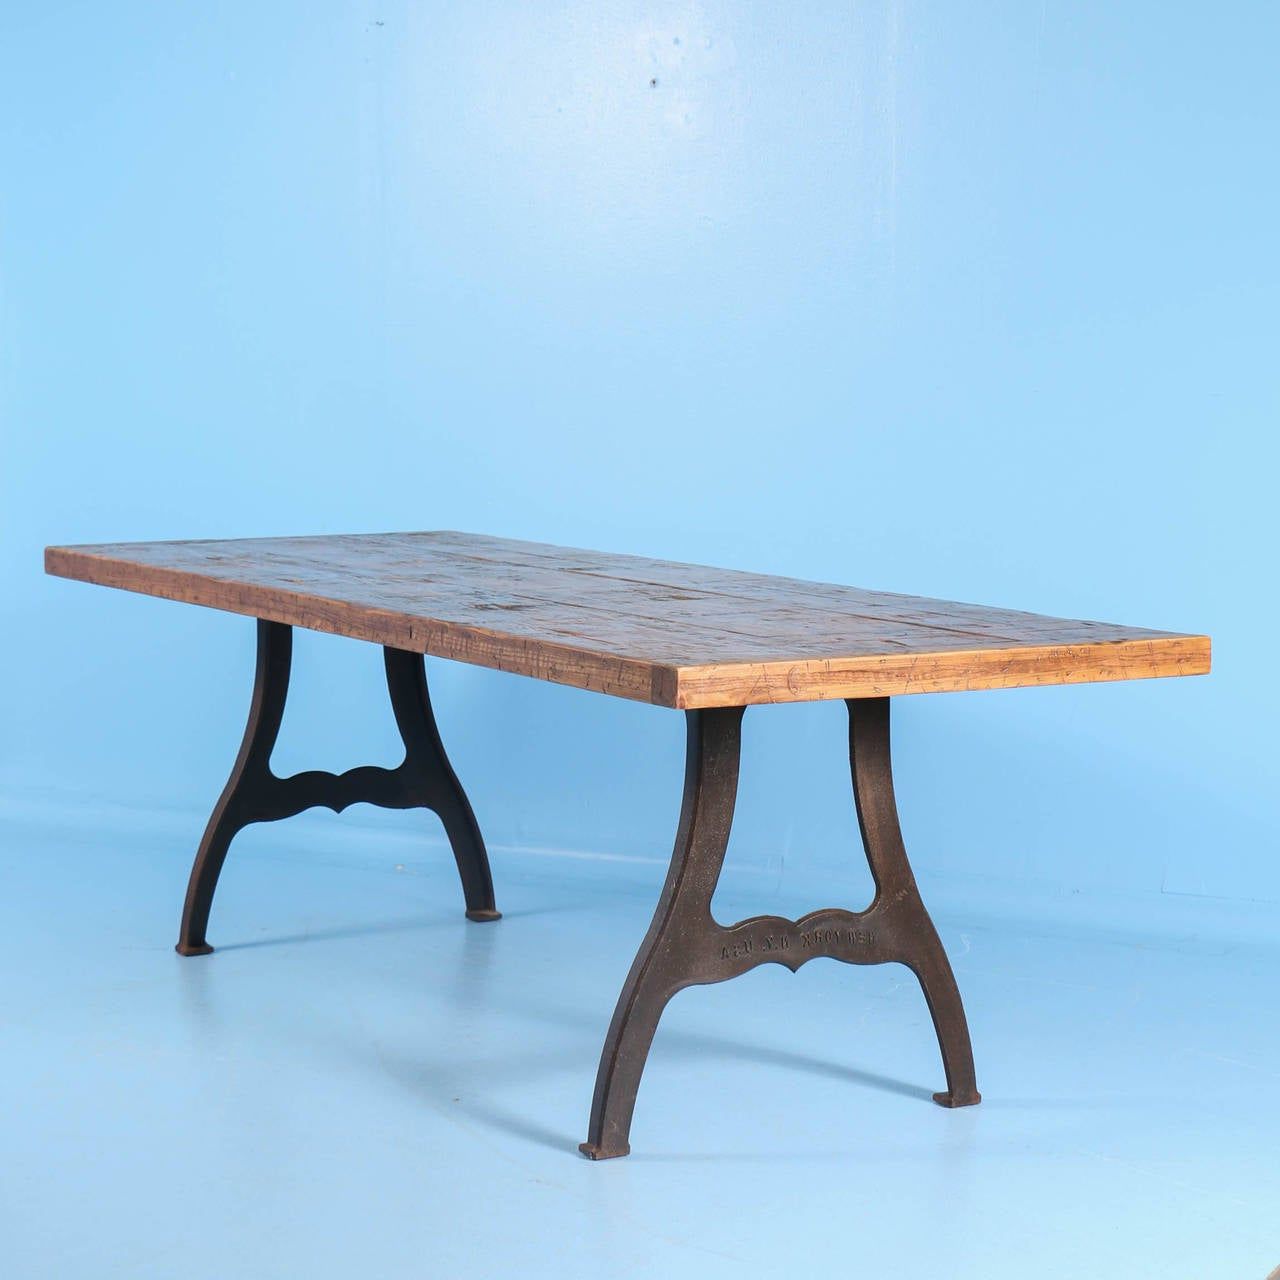 Best And Newest Vintage Industrial Look Dining Table From Reclaimed Wood Pertaining To Reclaimed Teak And Cast Iron Round Dining Tables (View 9 of 15)